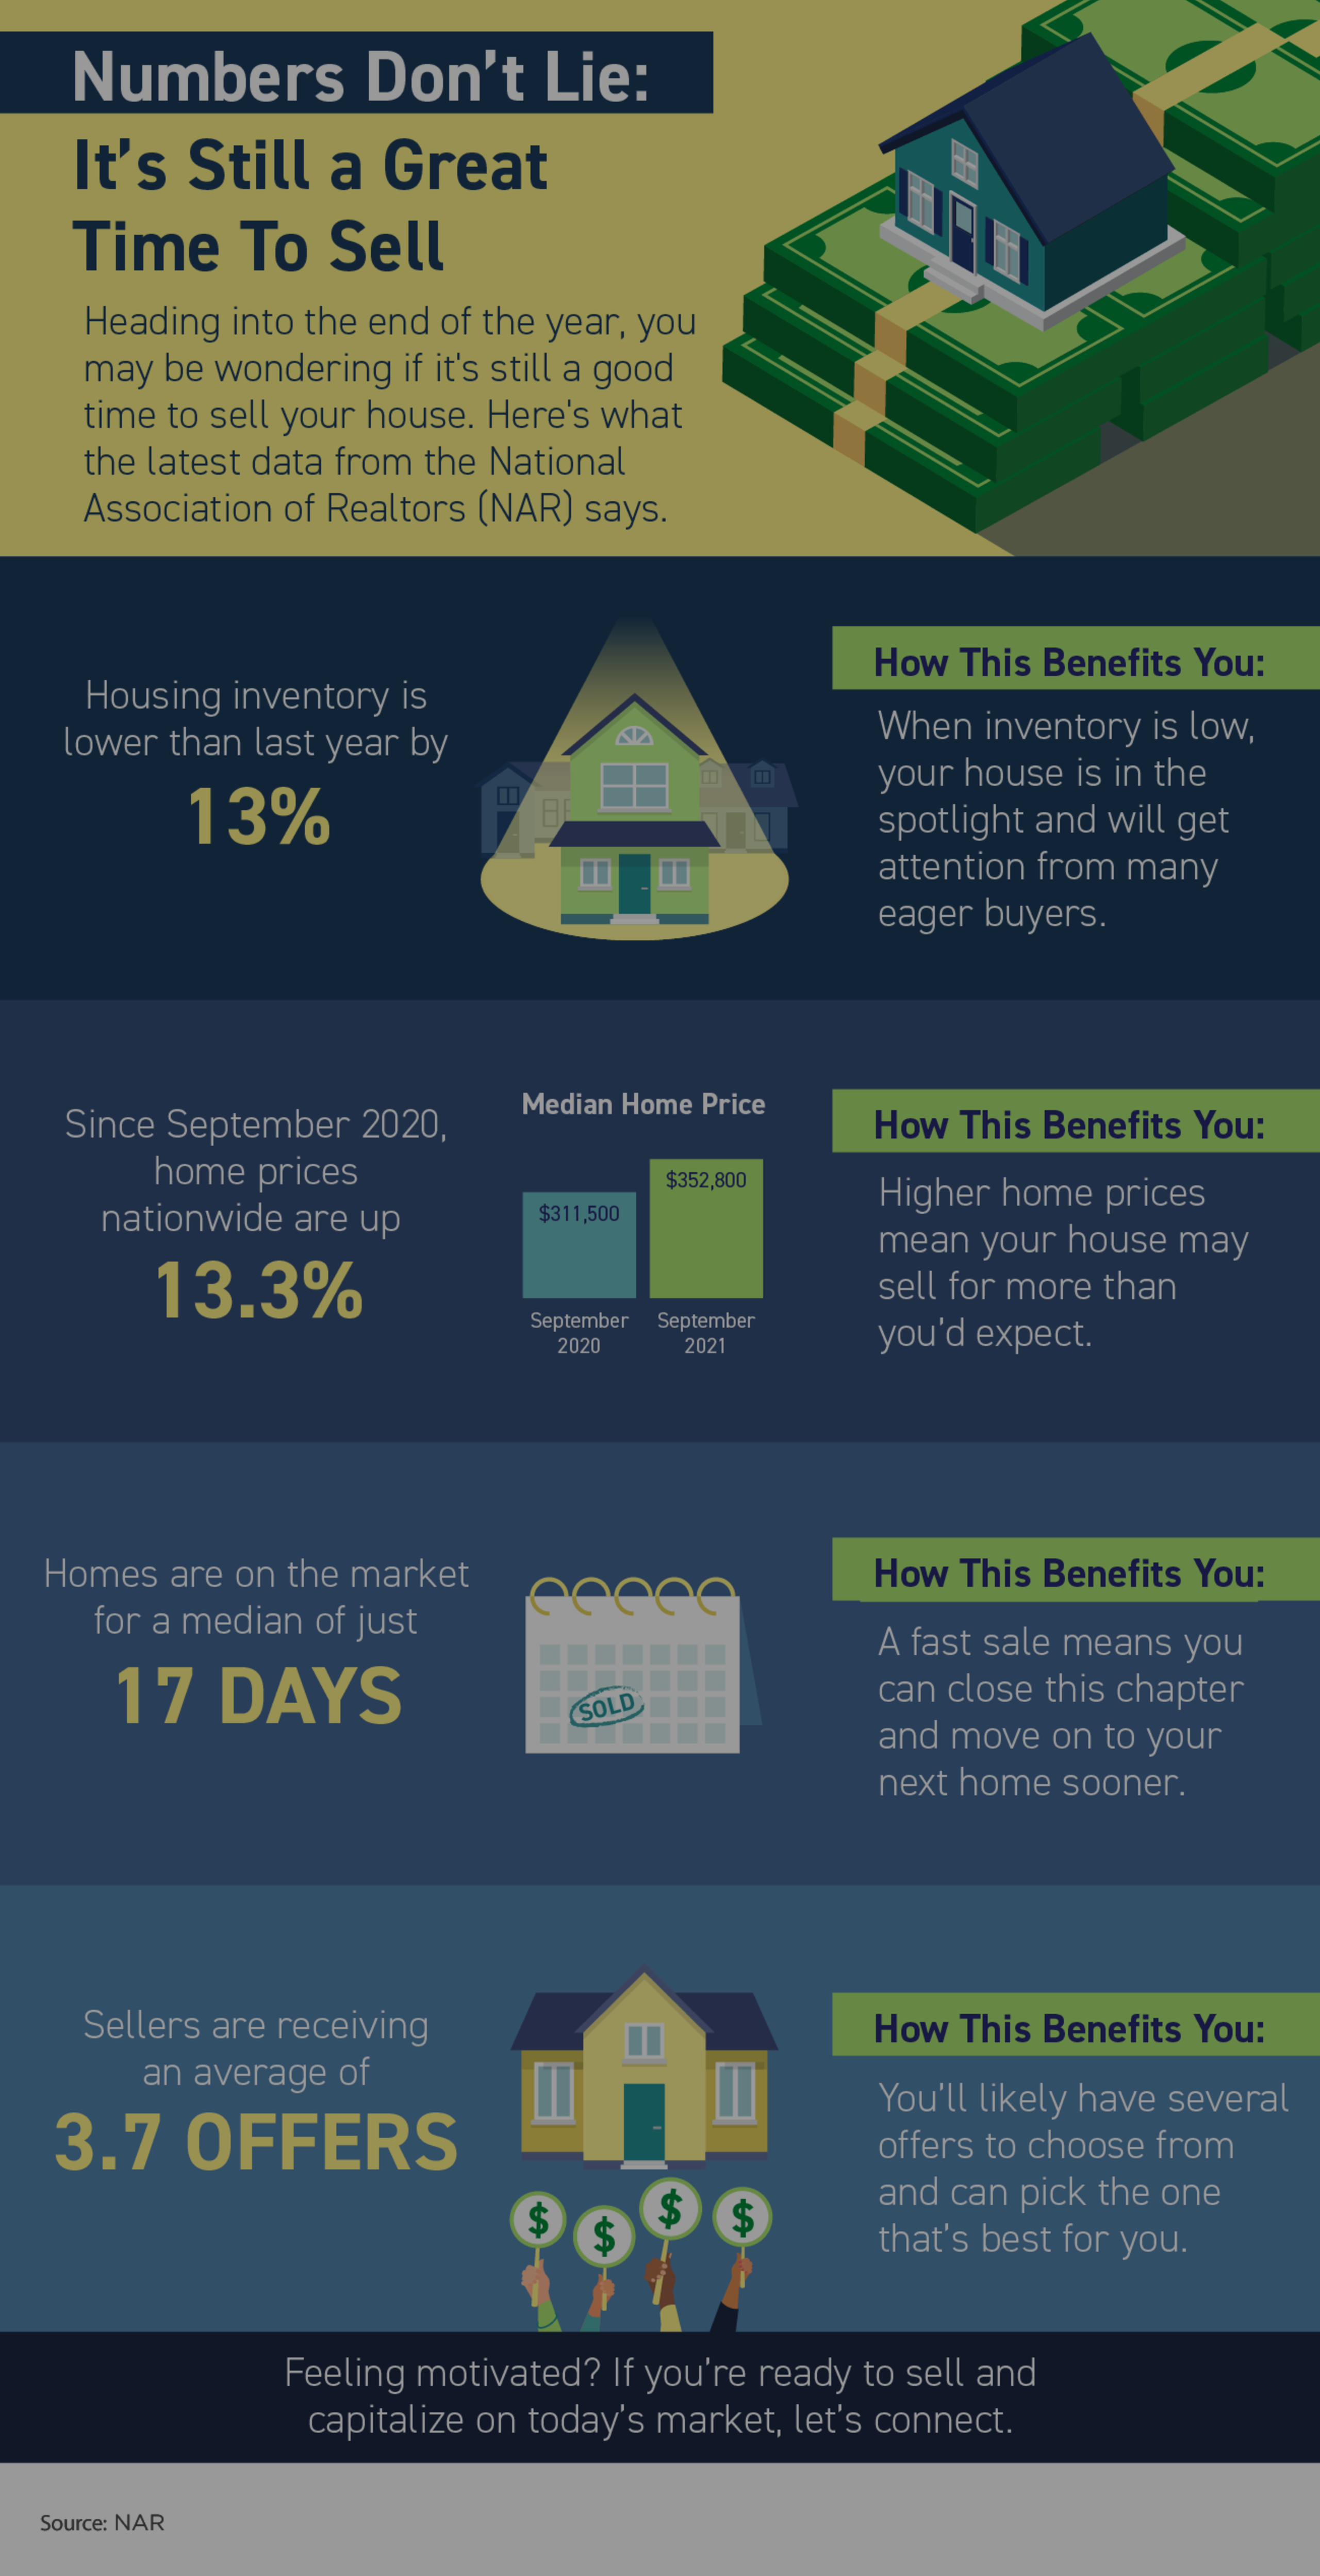 Numbers Don’t Lie – It’s Still a Great Time To Sell